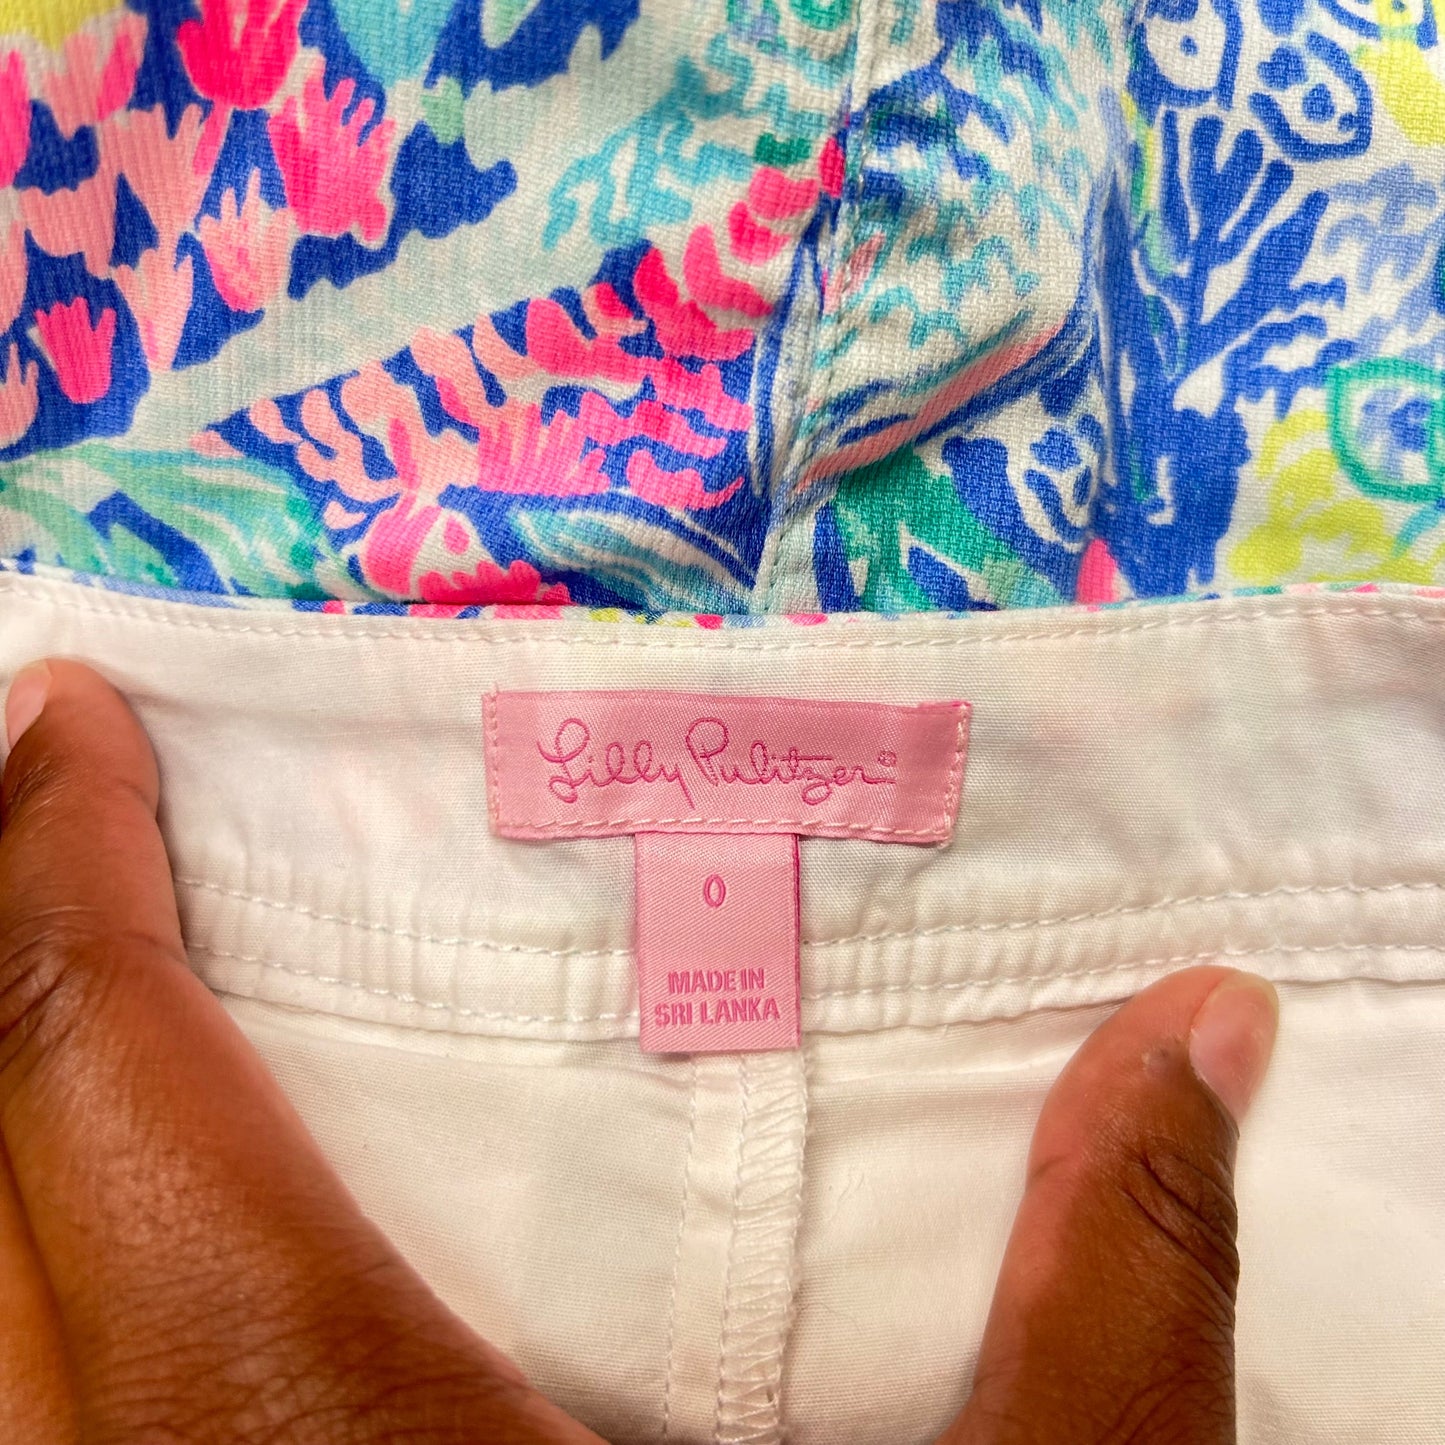 Blue Shorts By Lilly Pulitzer, Size: 0